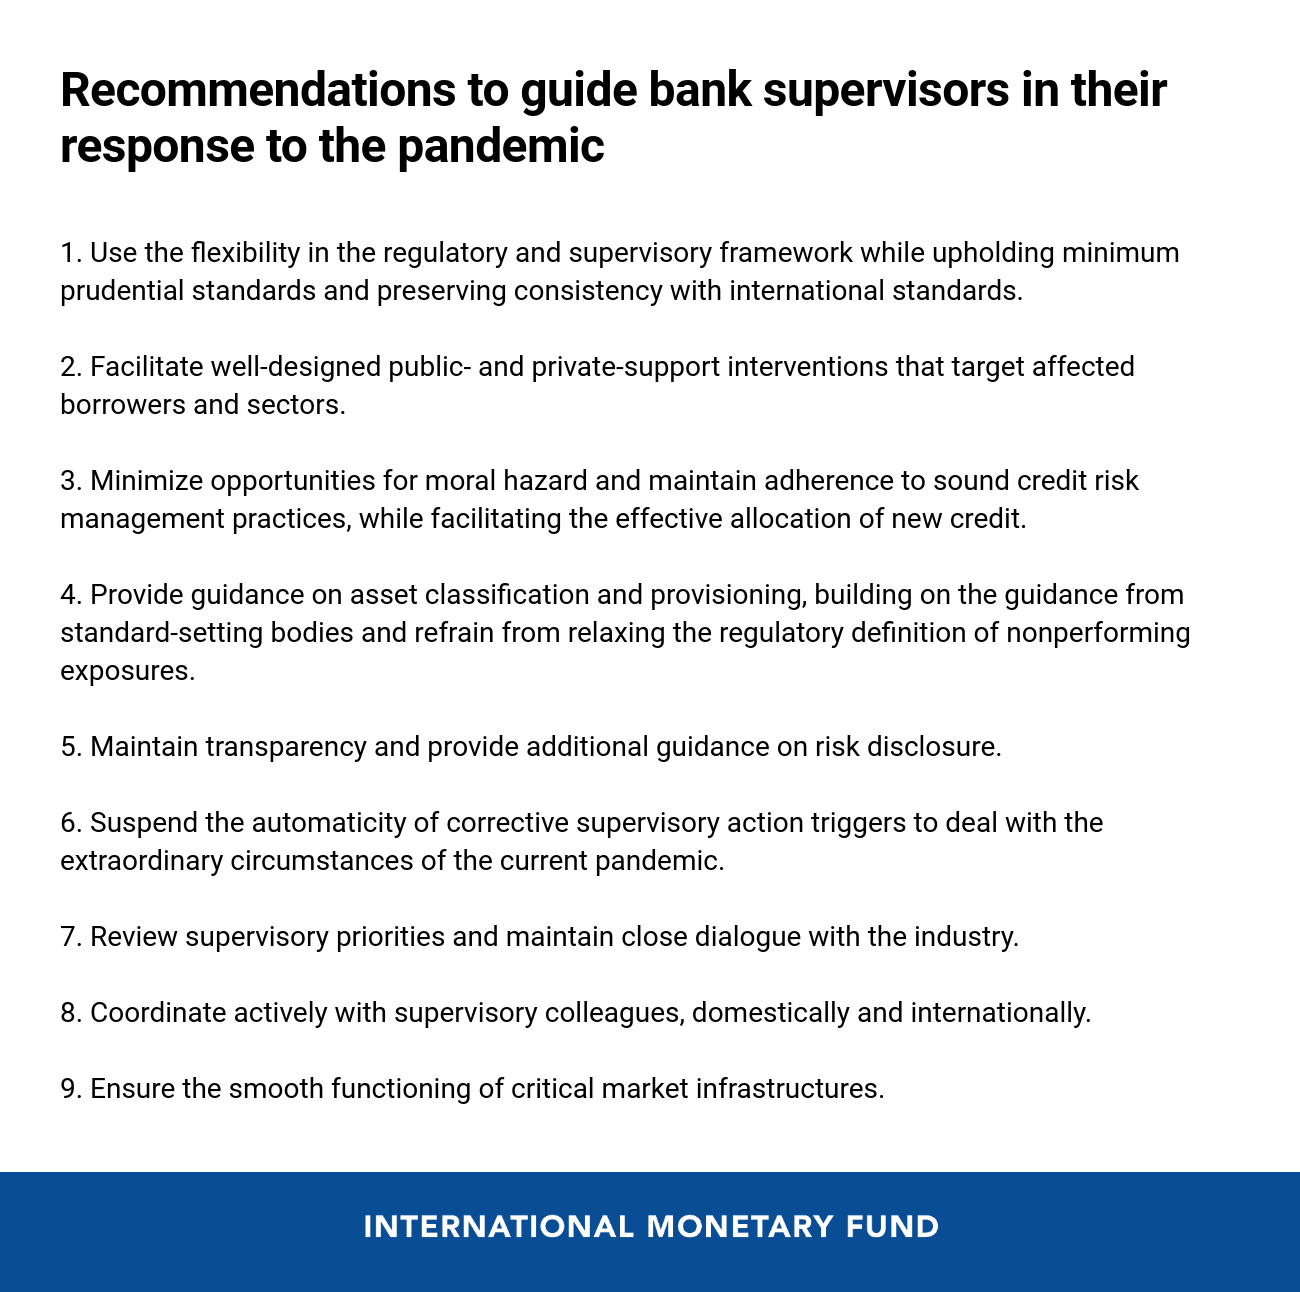 Caribbean News Global banking-june-10-table-1 Combating COVID-19: How should banking supervisors respond? 